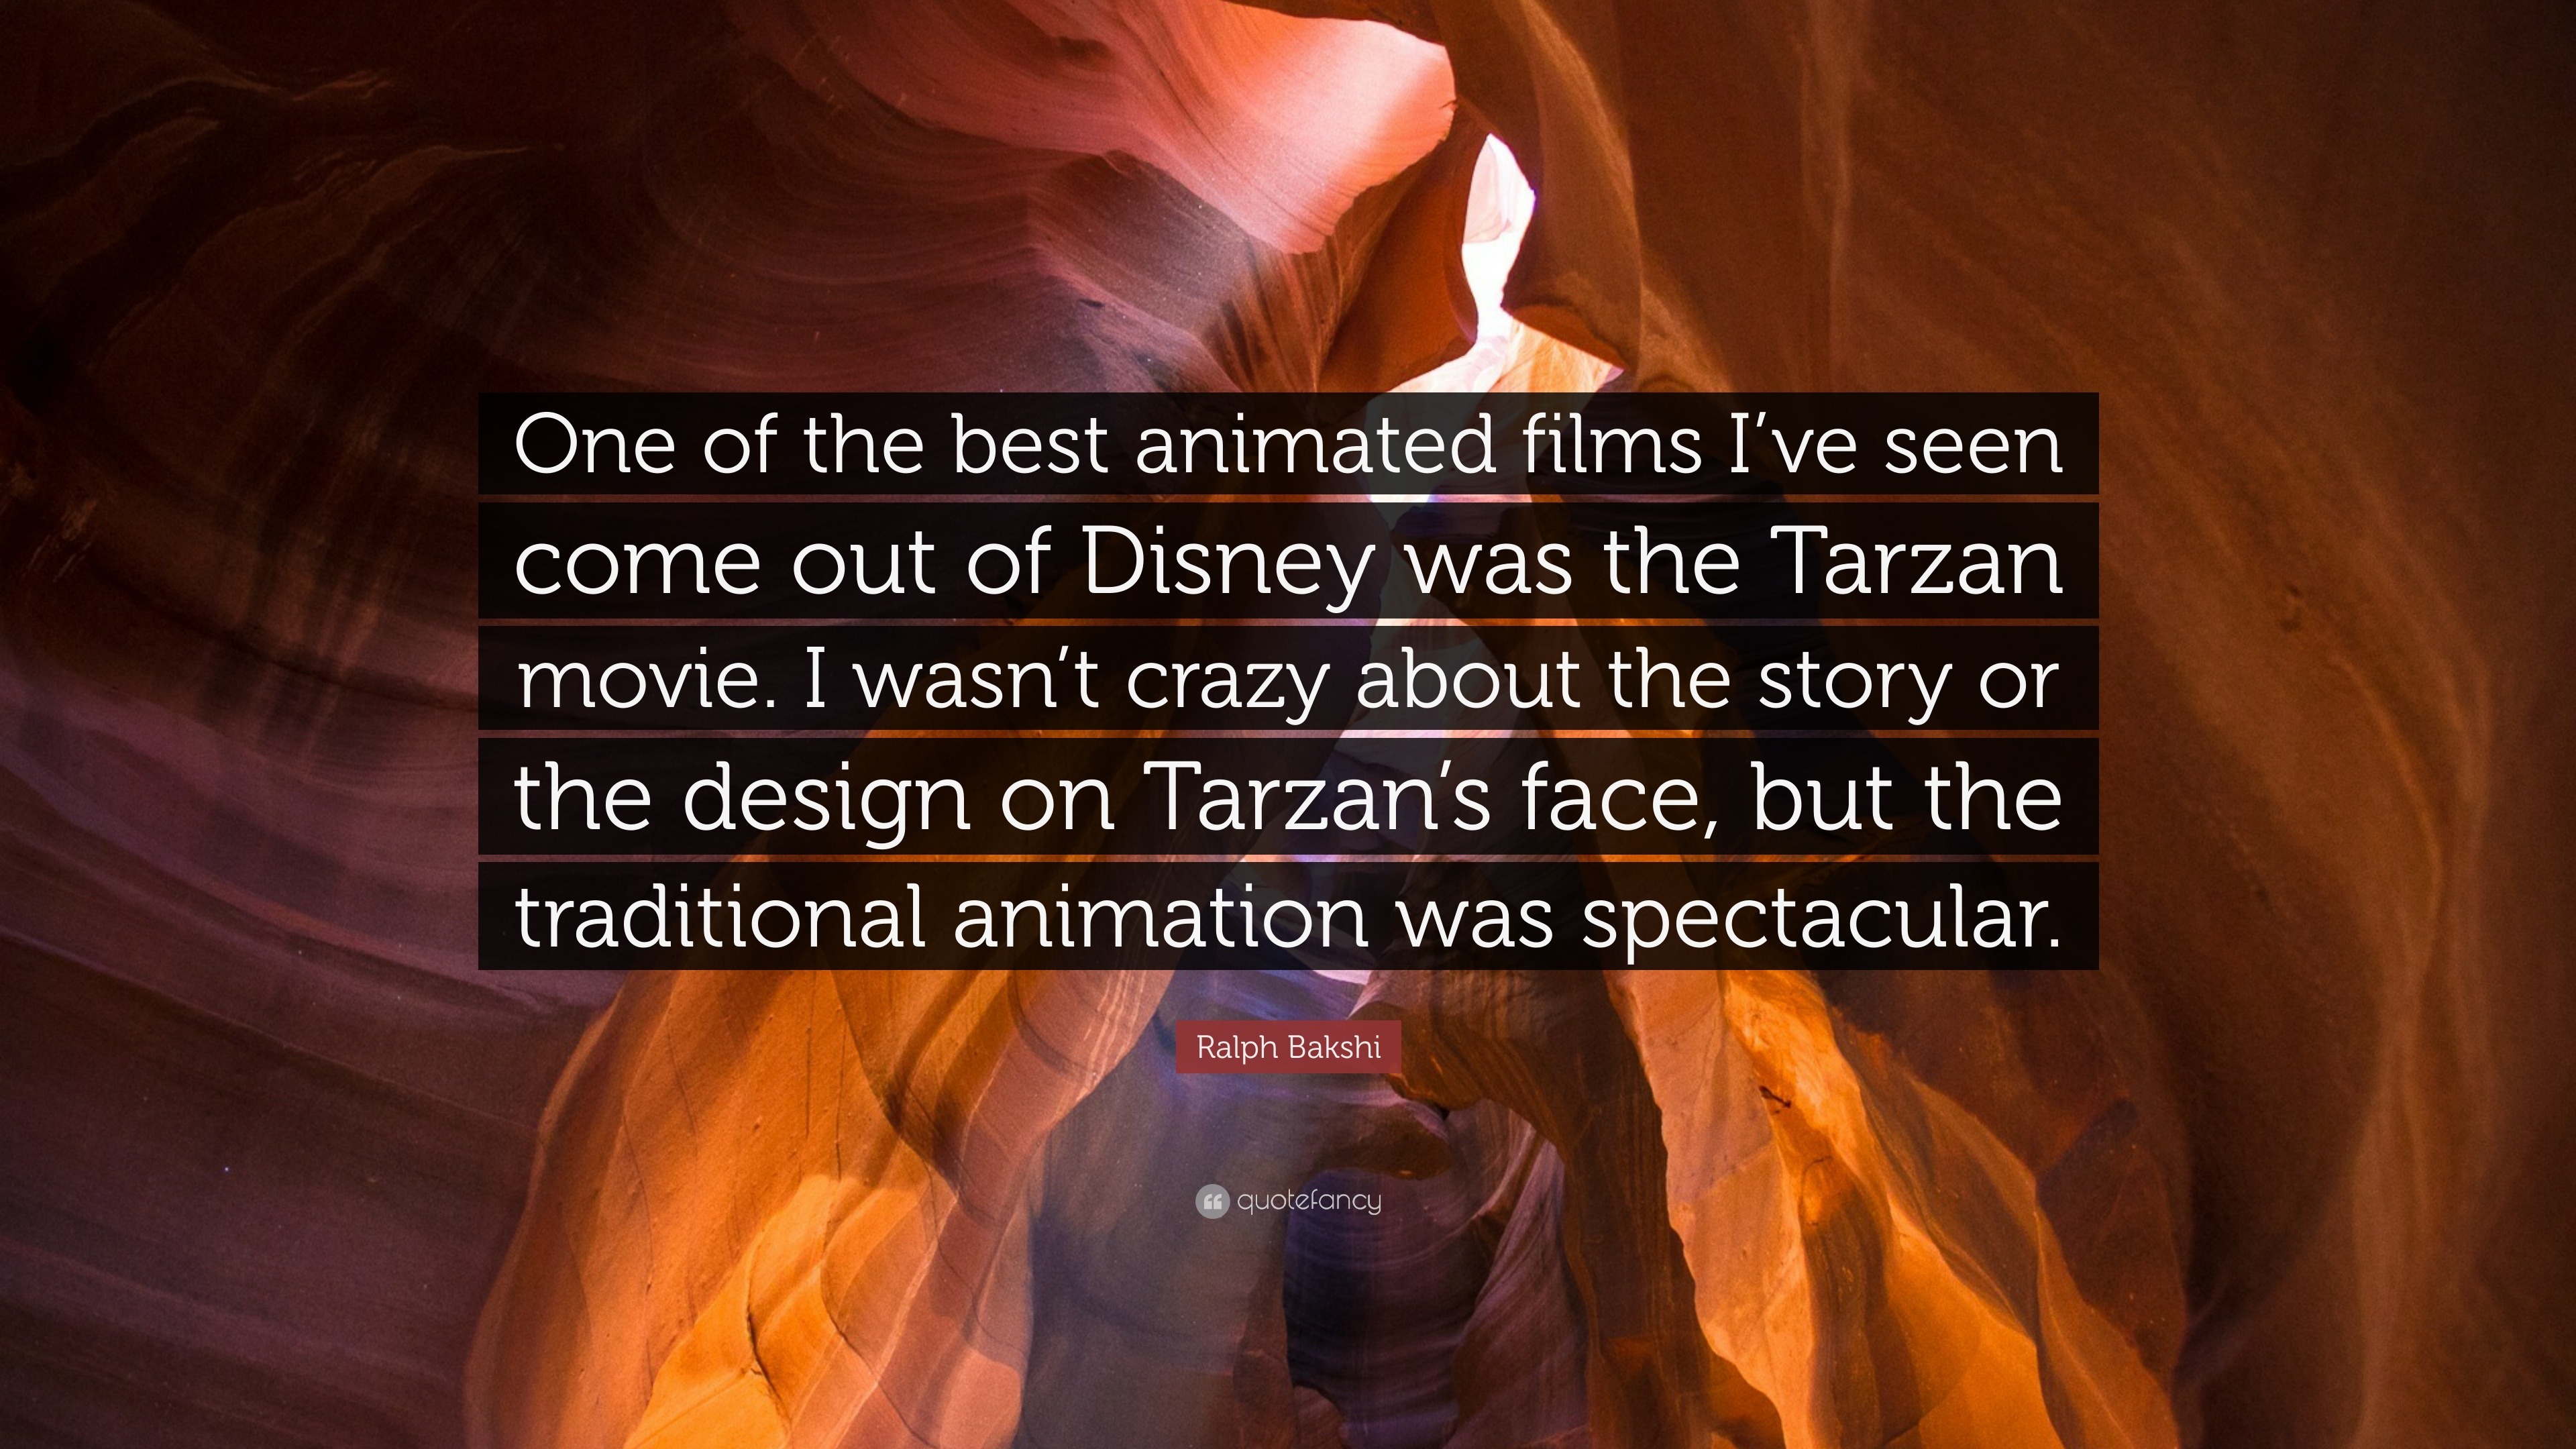 Ralph Bakshi Quote: “One of the best animated films I've seen come out of  Disney was the Tarzan movie. I wasn't crazy about the story or the ...”